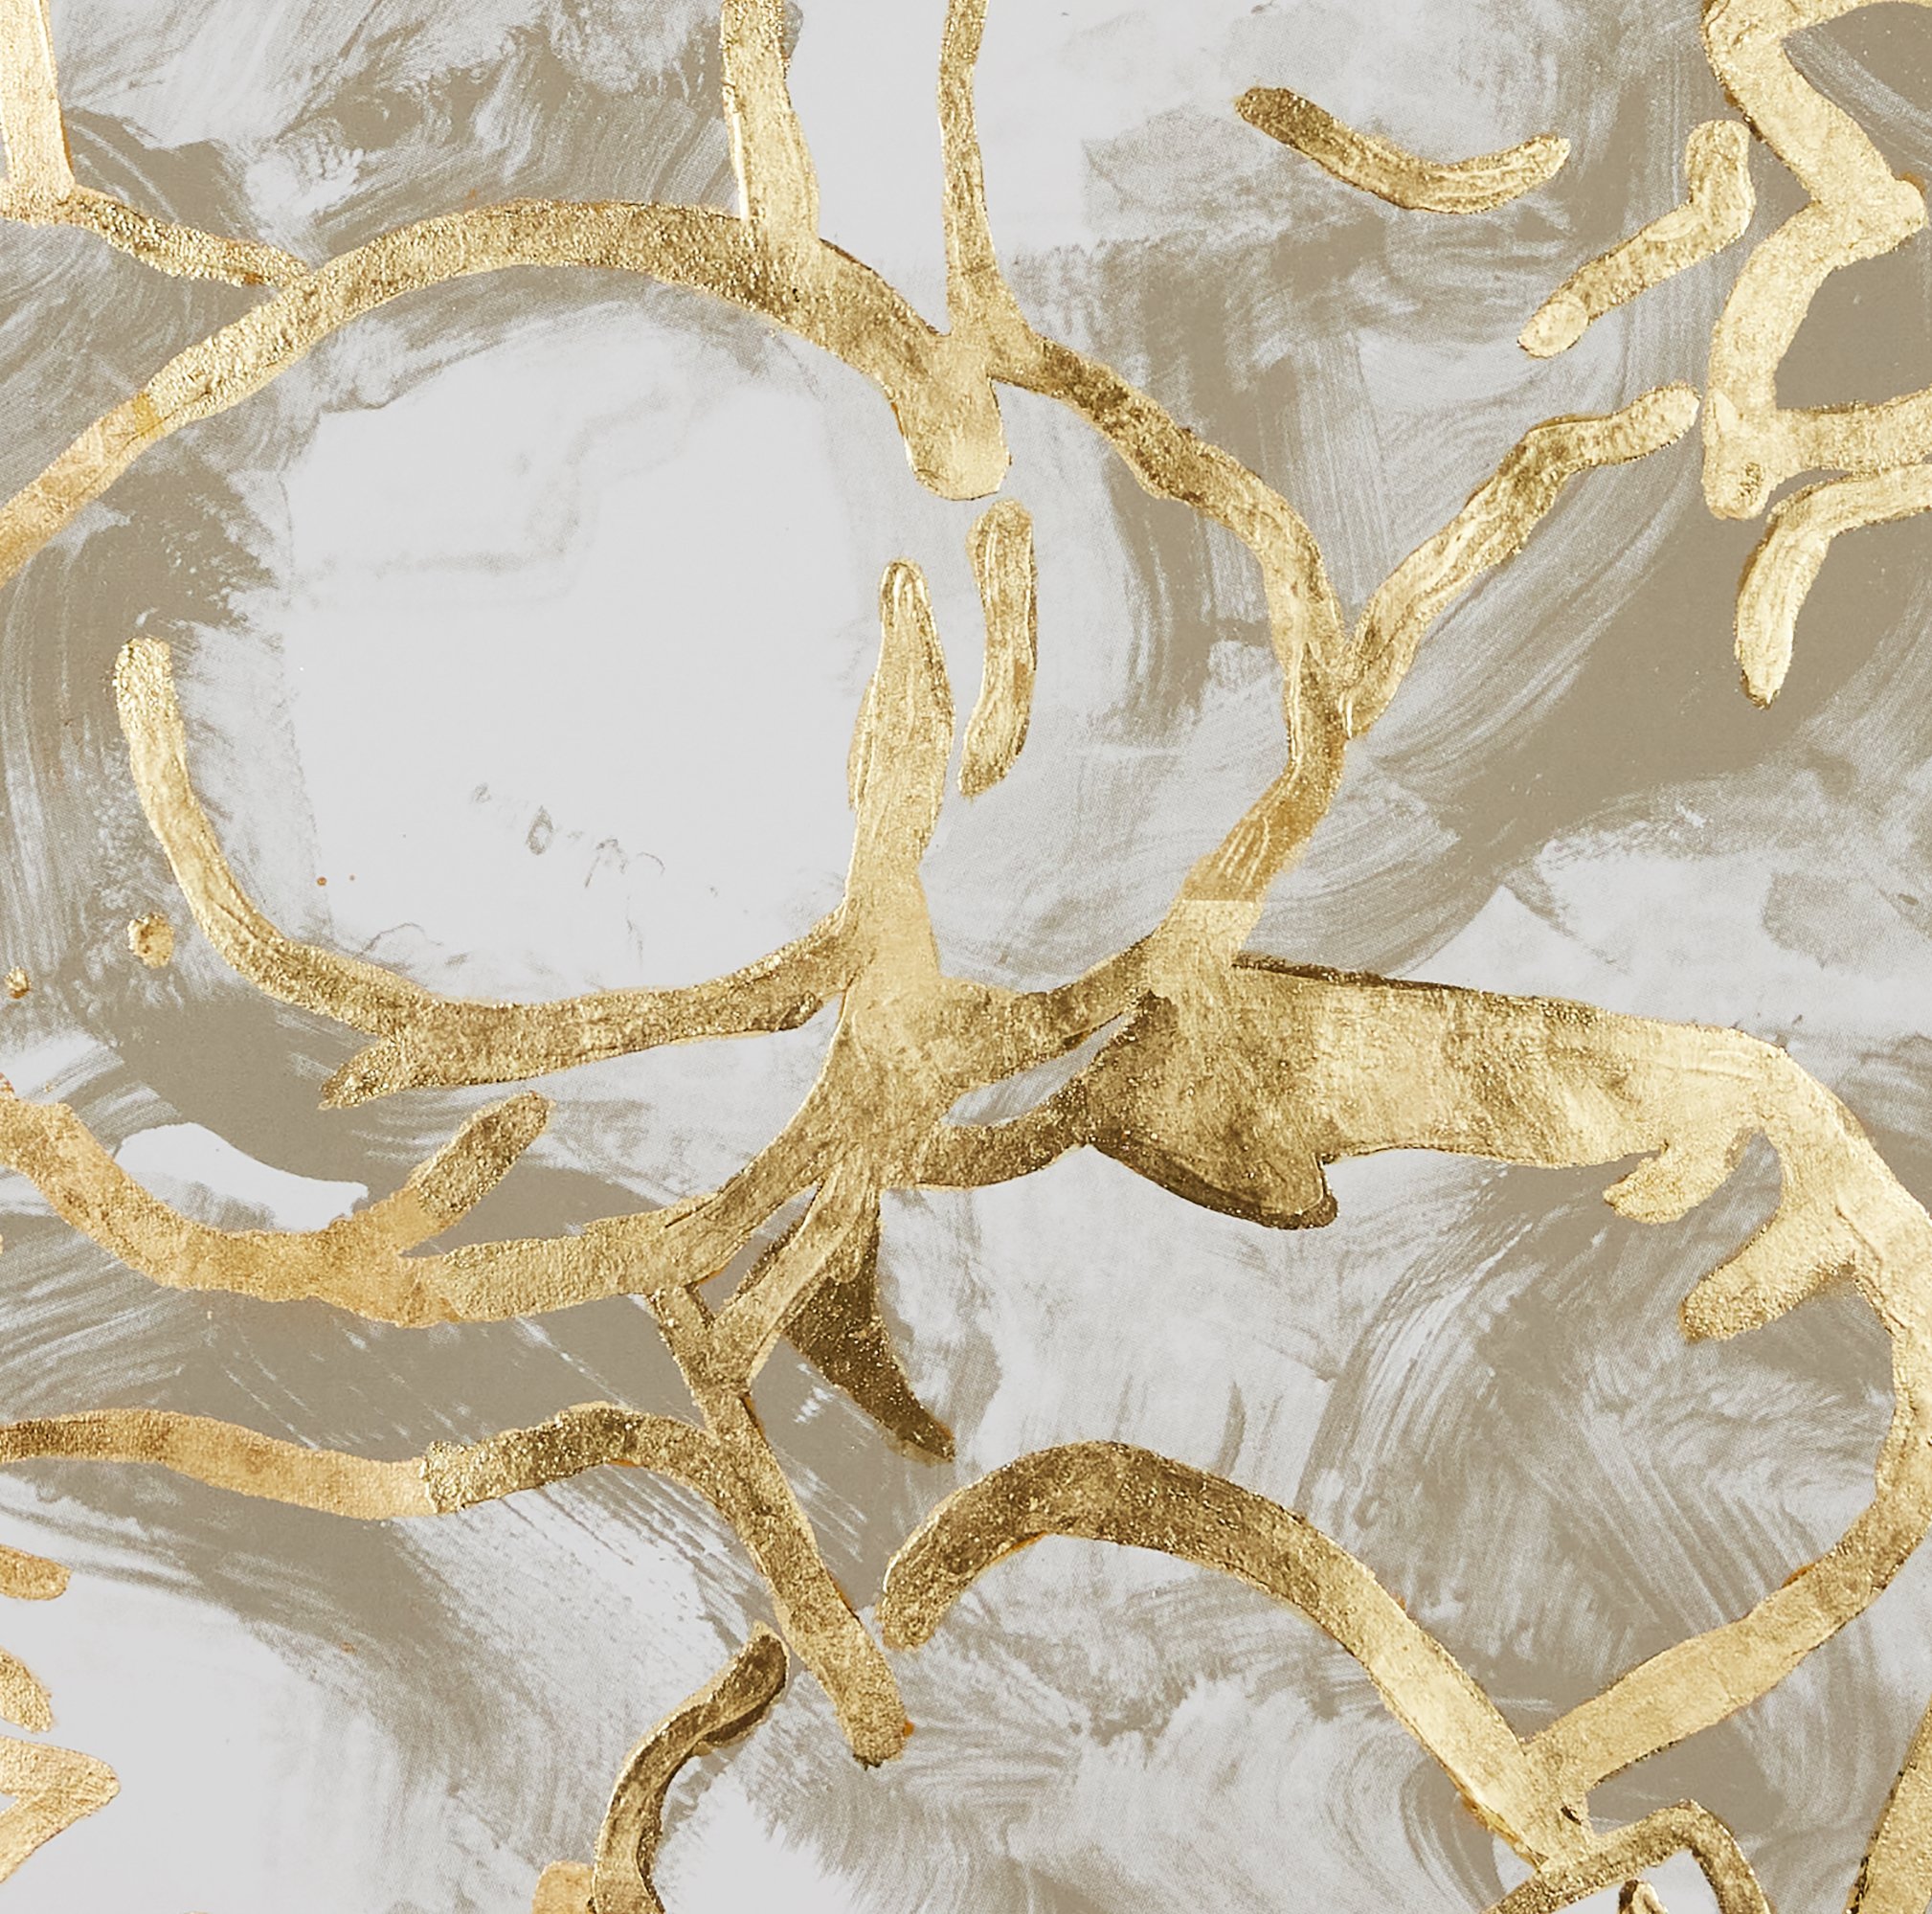 BECOMING SOMEONE ELSE: GOLD (MONOPRINT), 2023, 24k Gold leaf, paper monoprint (quartz), 40 x 30 inches, labeled “M.P.,” signed, and dated, unframed, Private Collection (DETAIL)